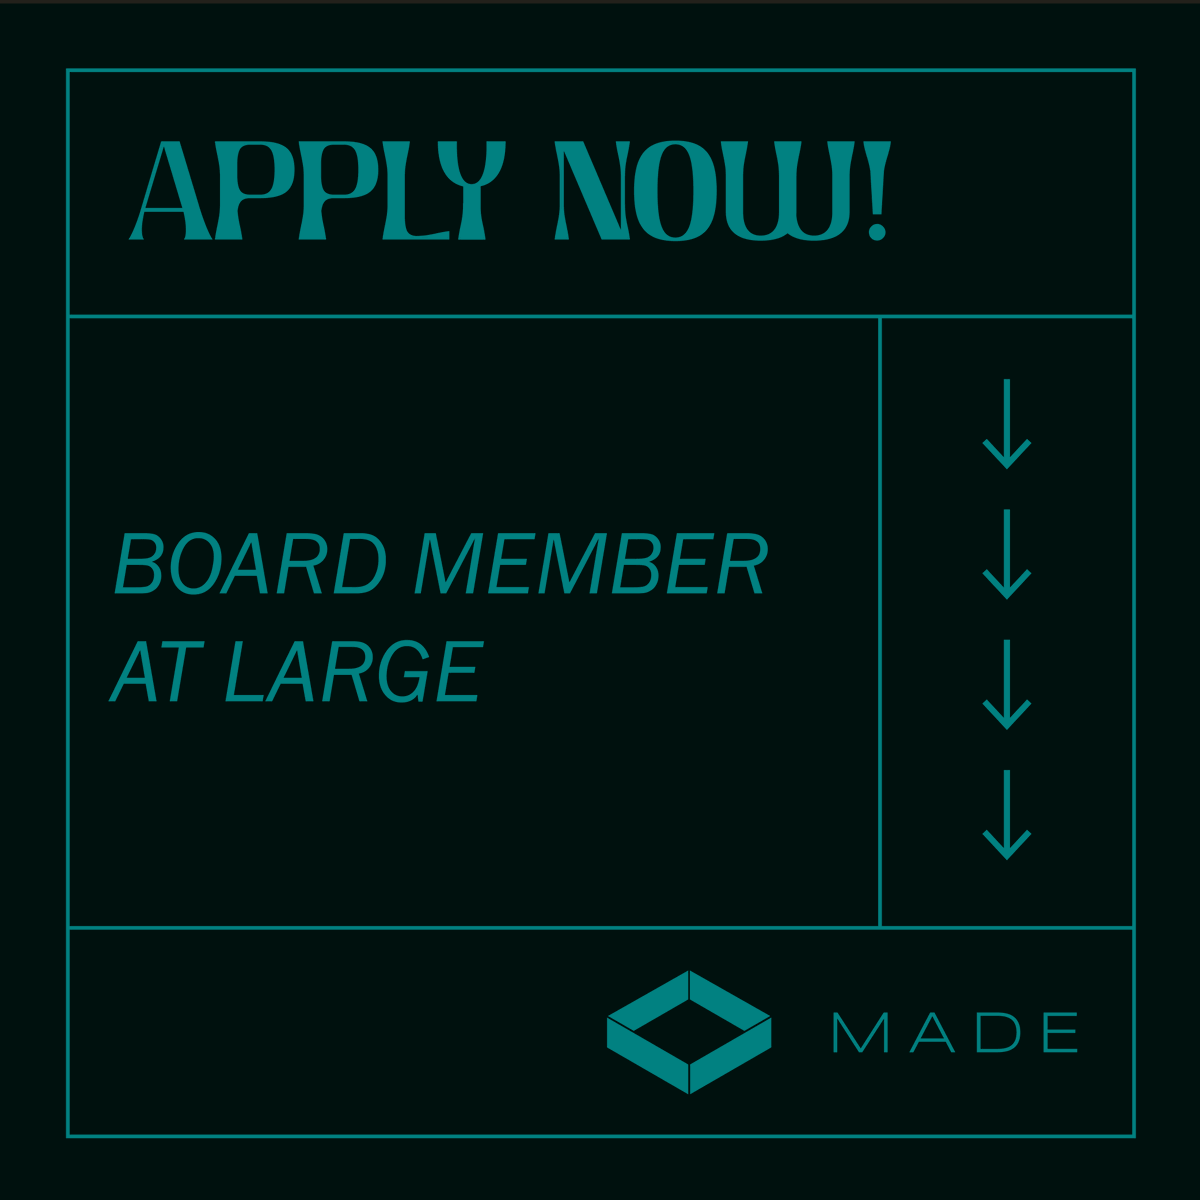 Do you have a passion for design? Looking to get involved in Edmonton’s design community? Join our Board! As a Board Member you will help advance the board’s projects and initiatives. If you’re interested, please email us at info@joinmade.org by Feb 1. joinmade.org/opportunities